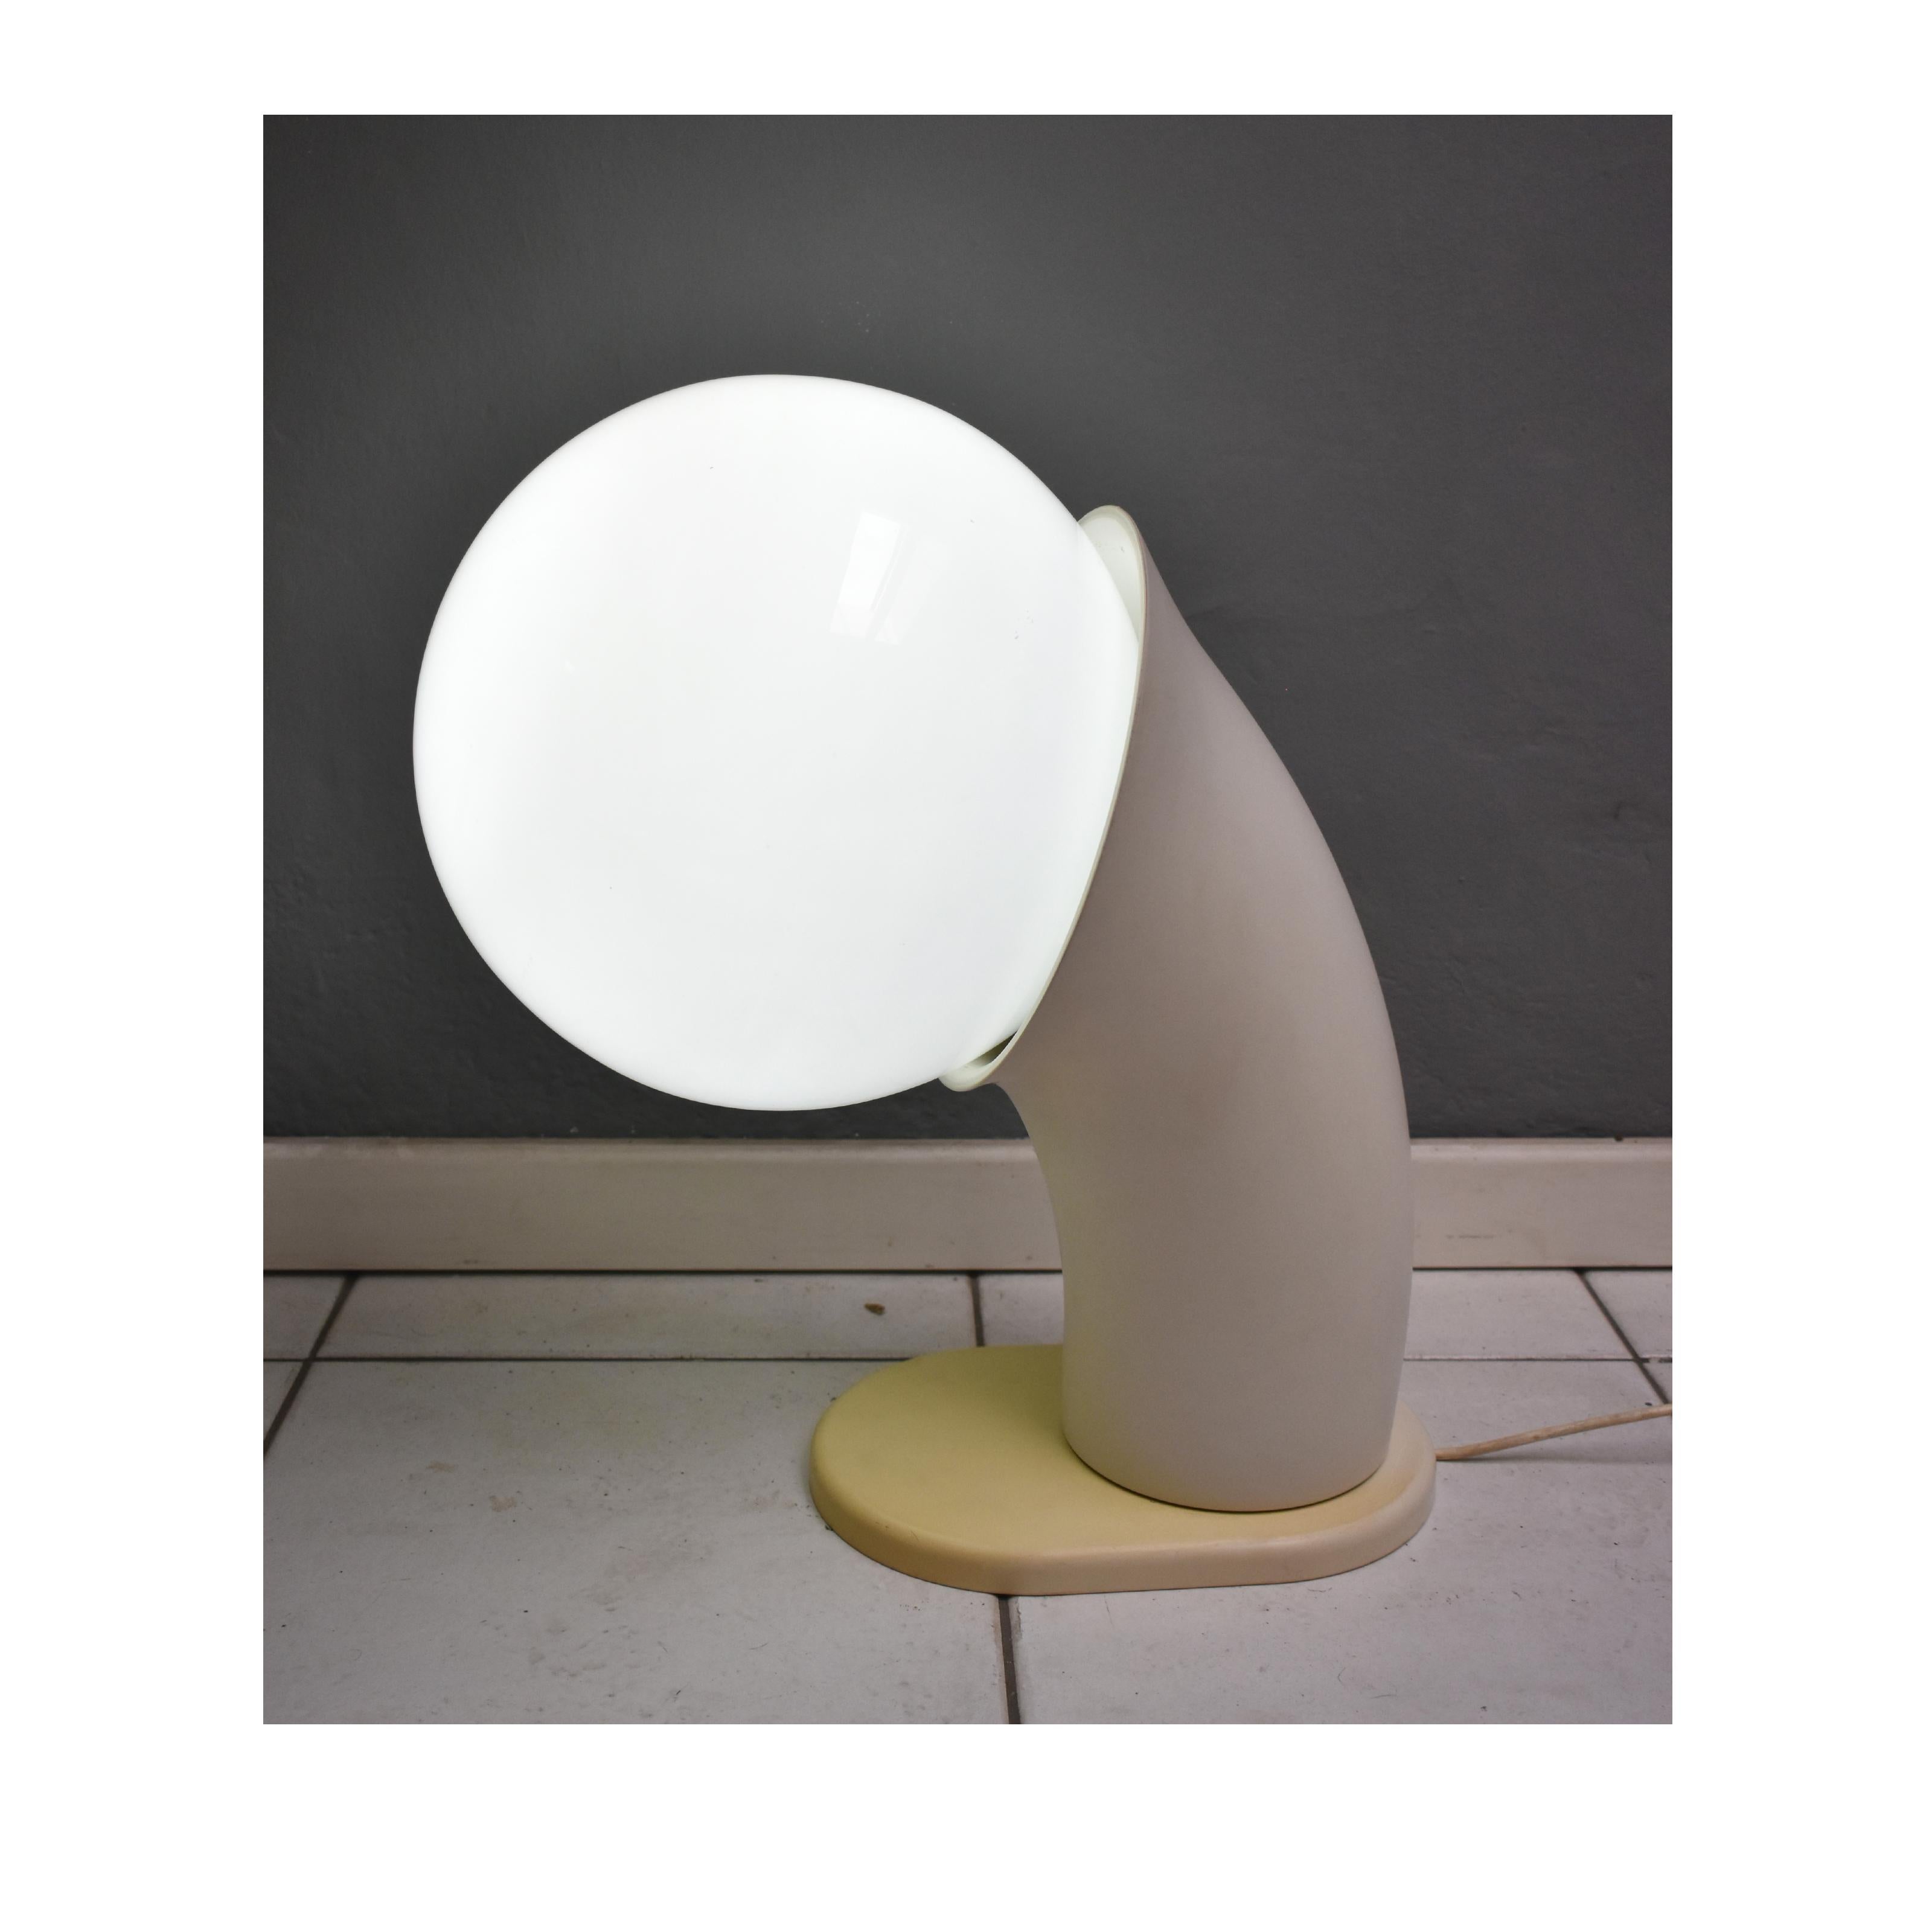 Vintage 1970s lamp, Italian manufacture.
The lamp has a plastic ivory structure and a spherical glass diffuser.
It emits a 360 degree beam of light.ù
The shape of the lamp is peculiar and refers to the design of the 70s.
It is working.
The